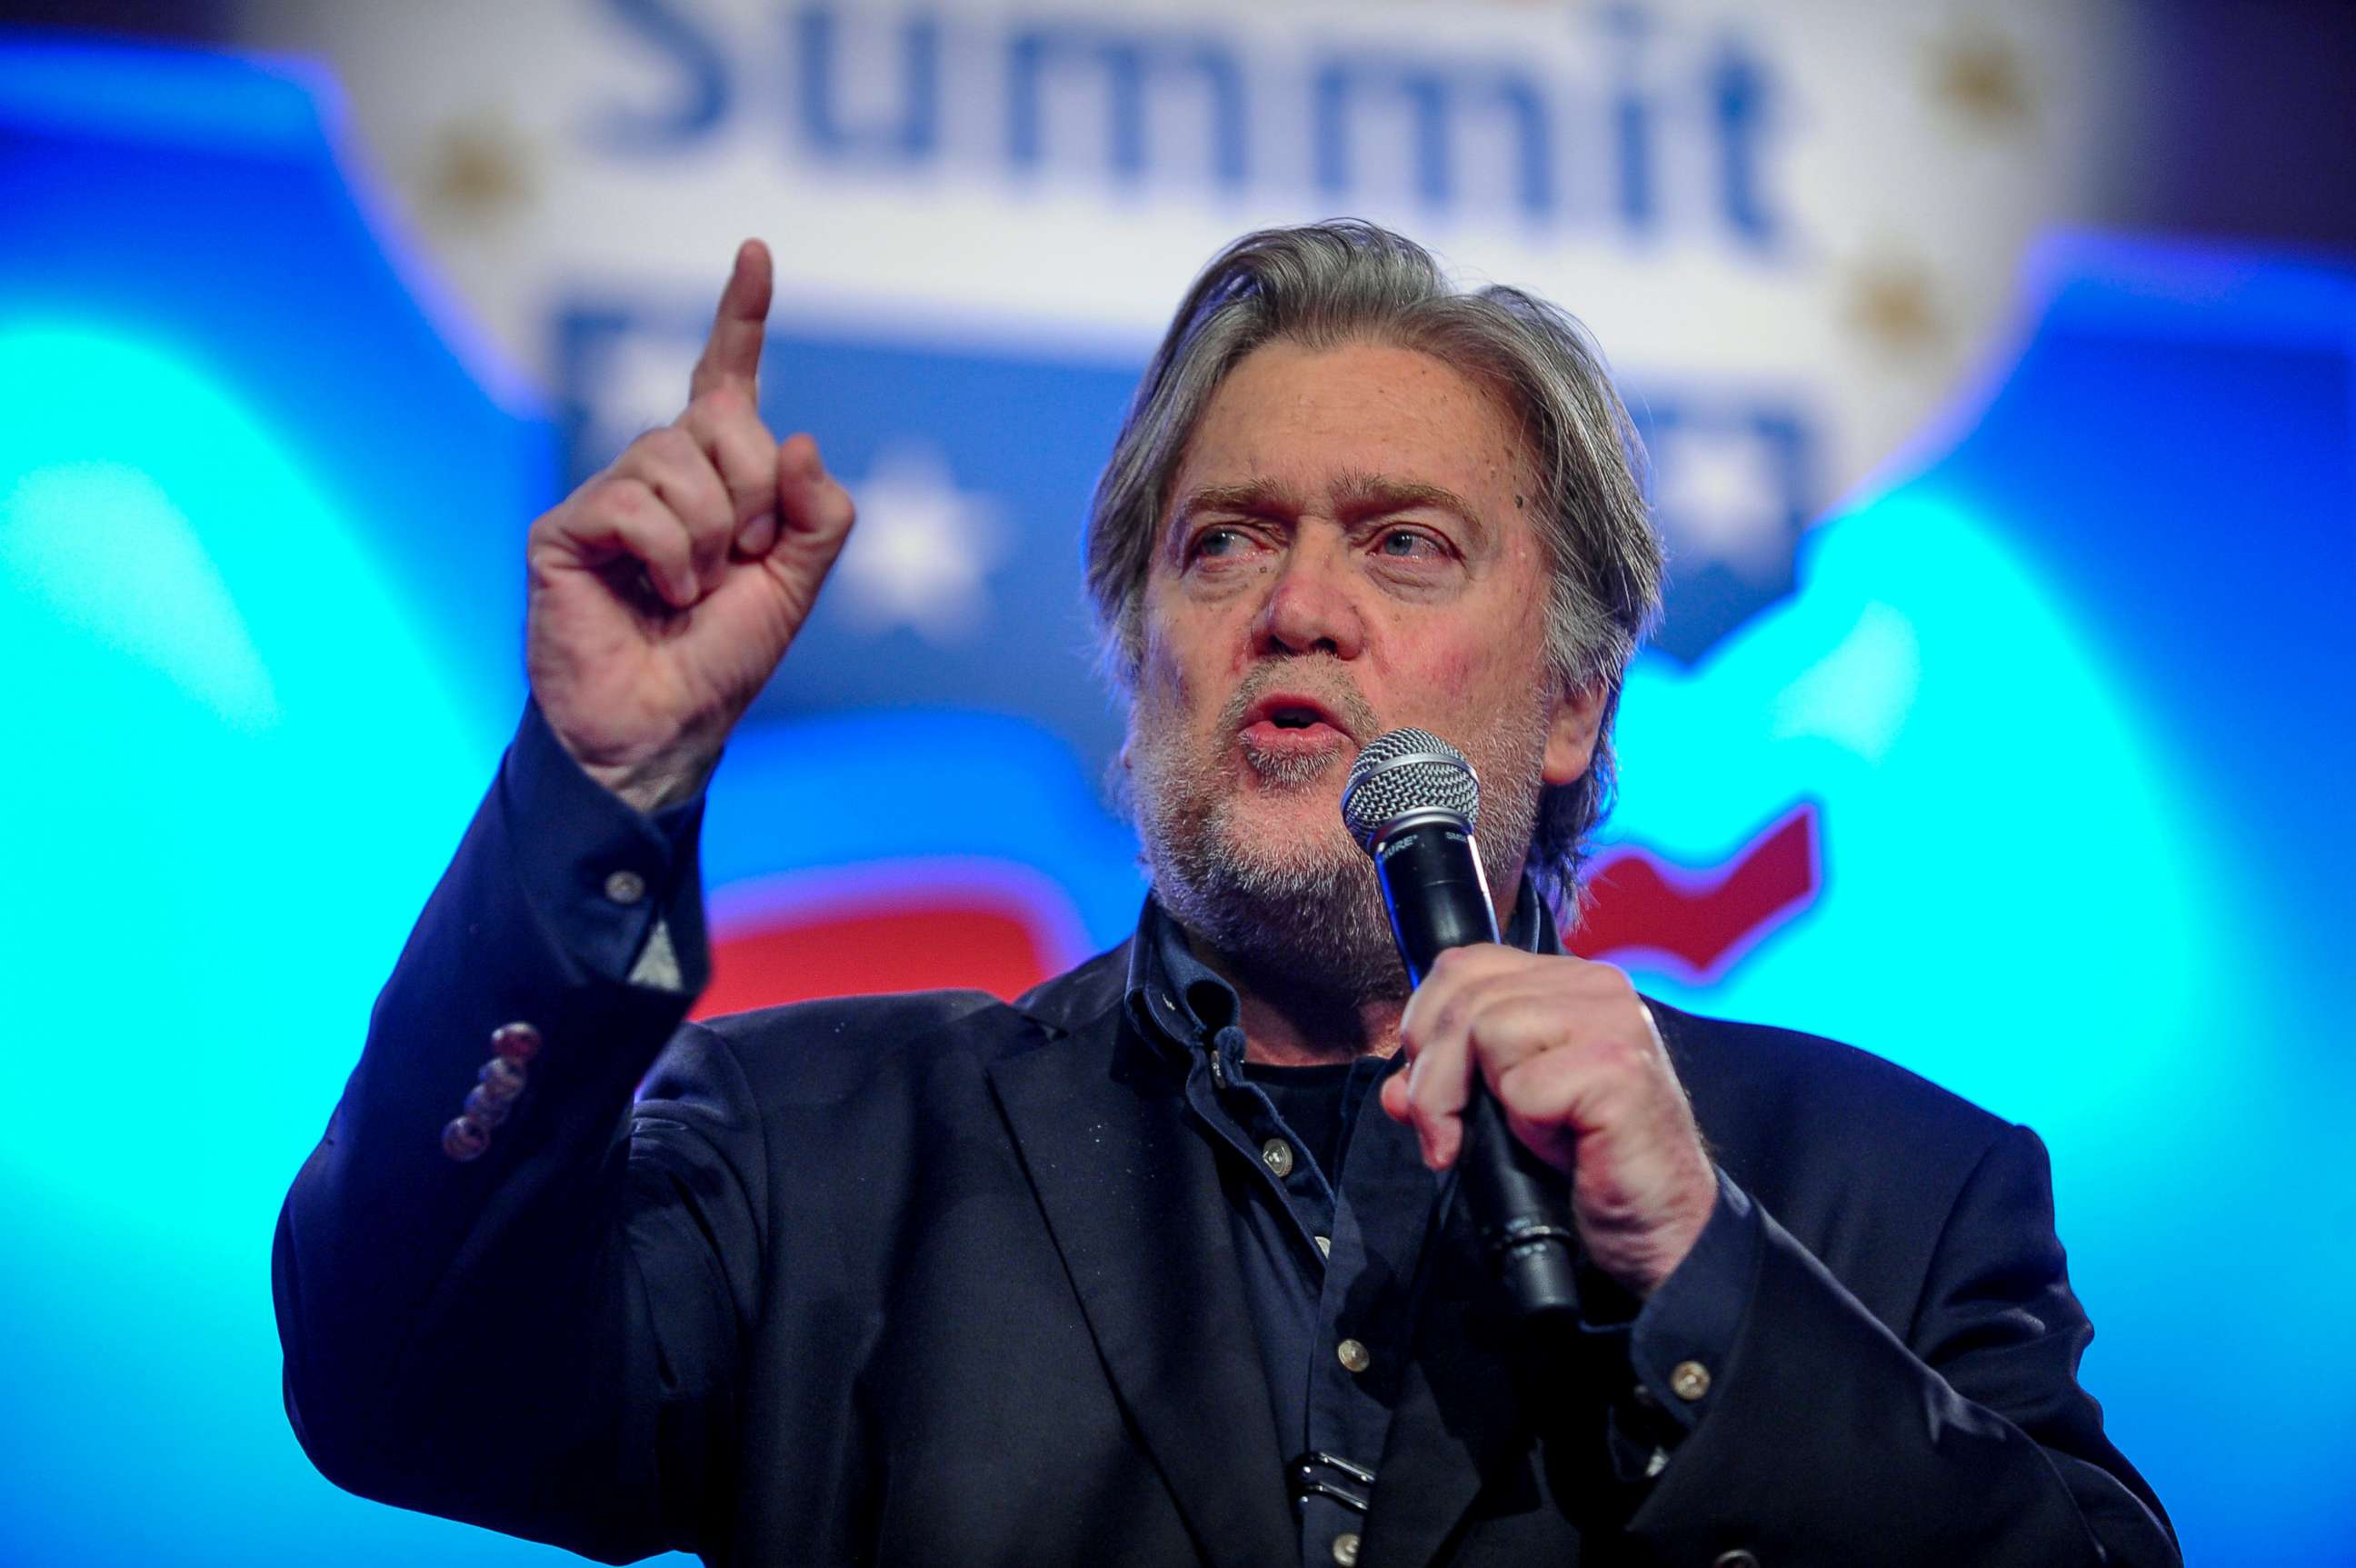 PHOTO: Former White House Chief Strategist Steve Bannon delivers remarks during the Value Voters Summit at the Omni Shoreham Hotel in Washington, D.C., Oct. 14, 2017.